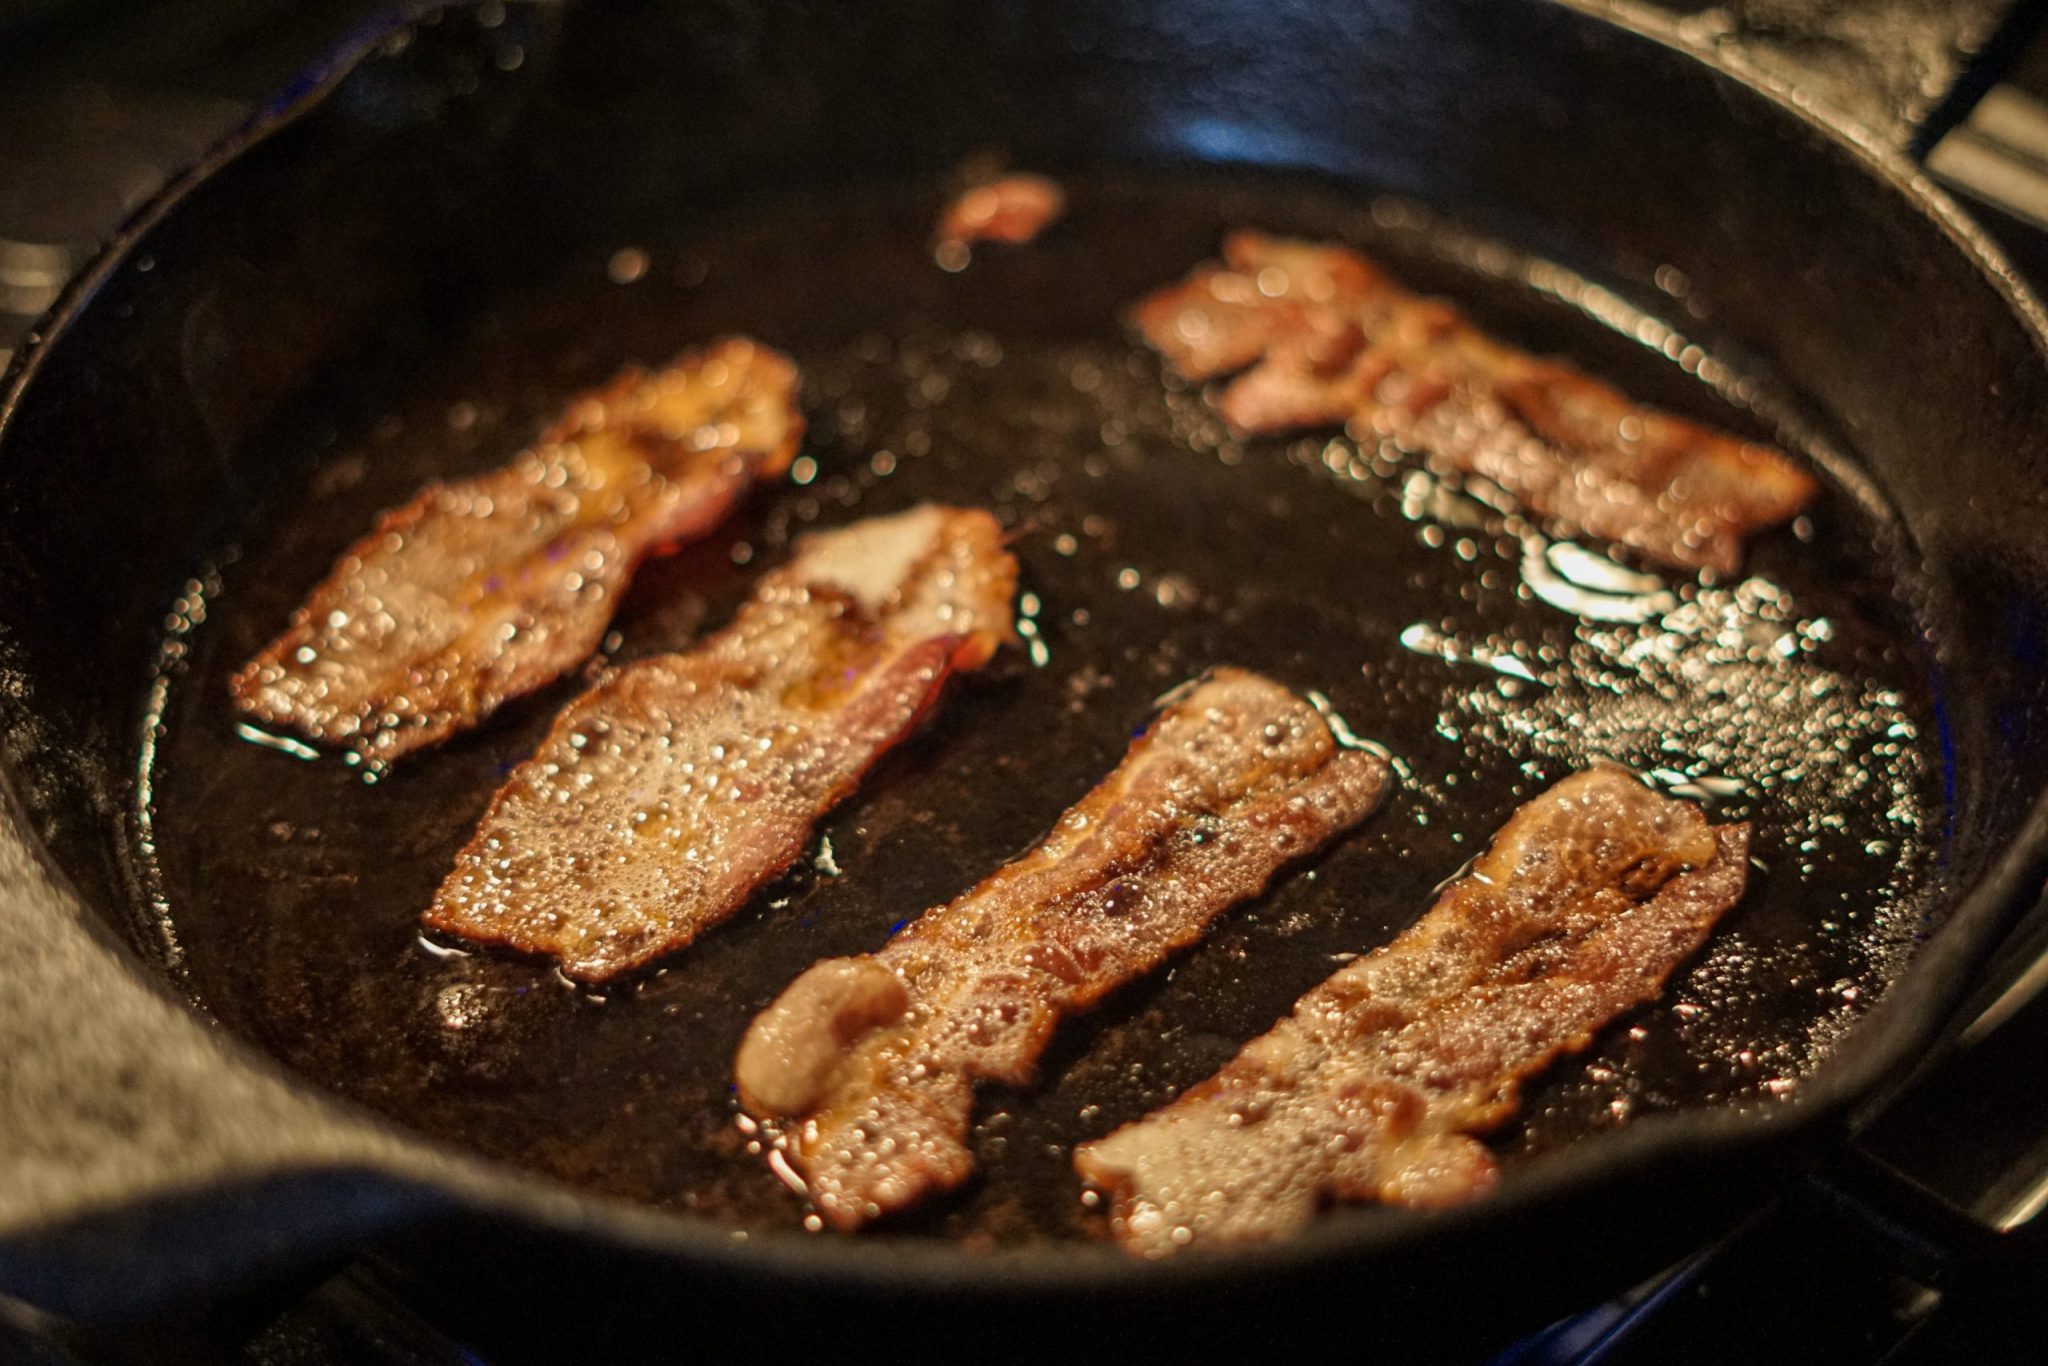 How To Make Weed Bacon